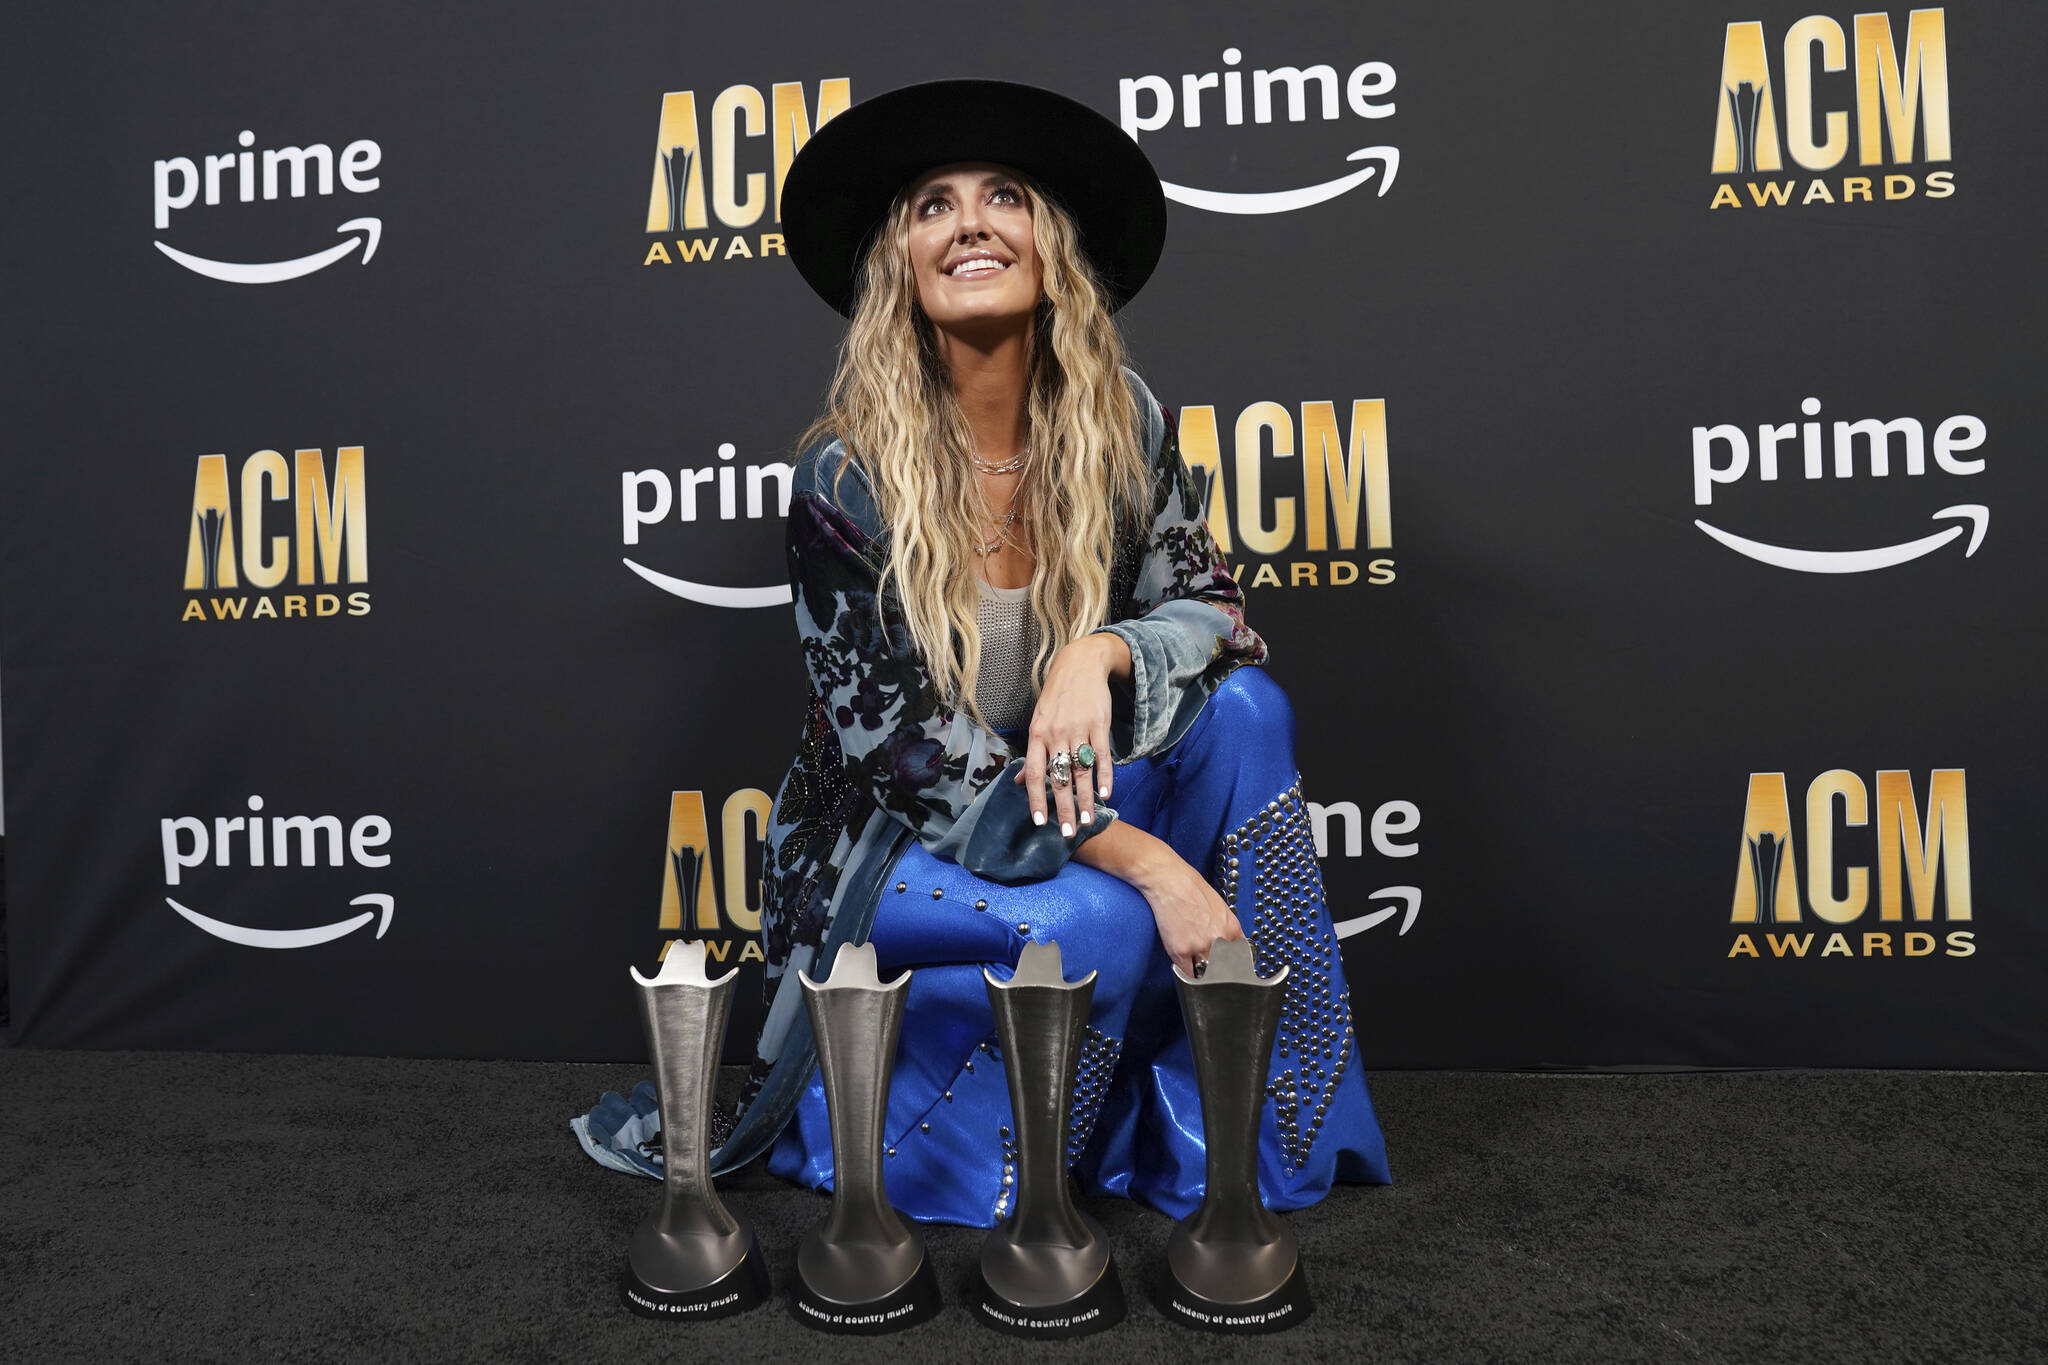 Lainey Wilson poses with the awards for album of the year for “Bell Bottom Country”, female artist of the year, music event of the year for “Wait in the Truck”, and visual media of the year for “Wait in the Truck”, in the press room at the 58th annual Academy of Country Music Awards on Thursday, May 11, 2023, at the Ford Center in Frisco, Texas. (AP Photo/Jeffrey McWhorter)